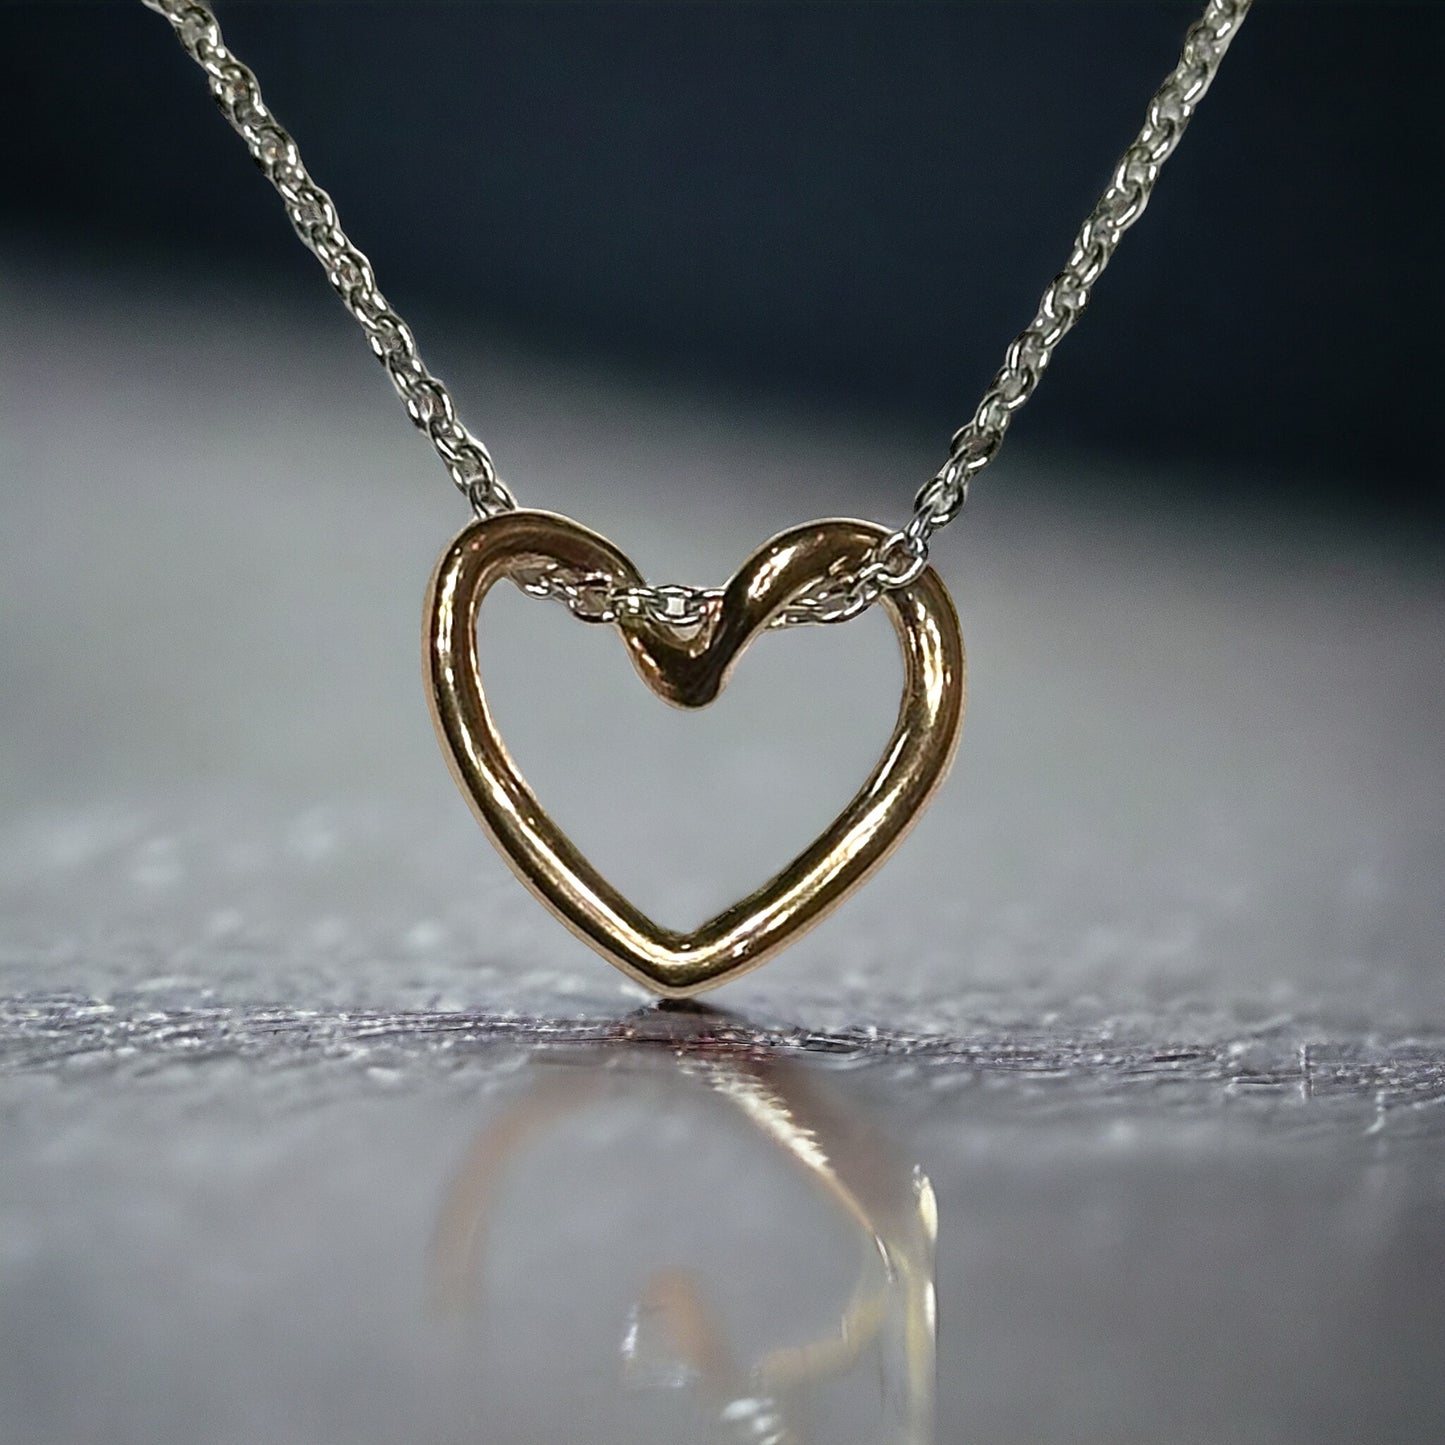 Ring Of Love Pendant Necklace